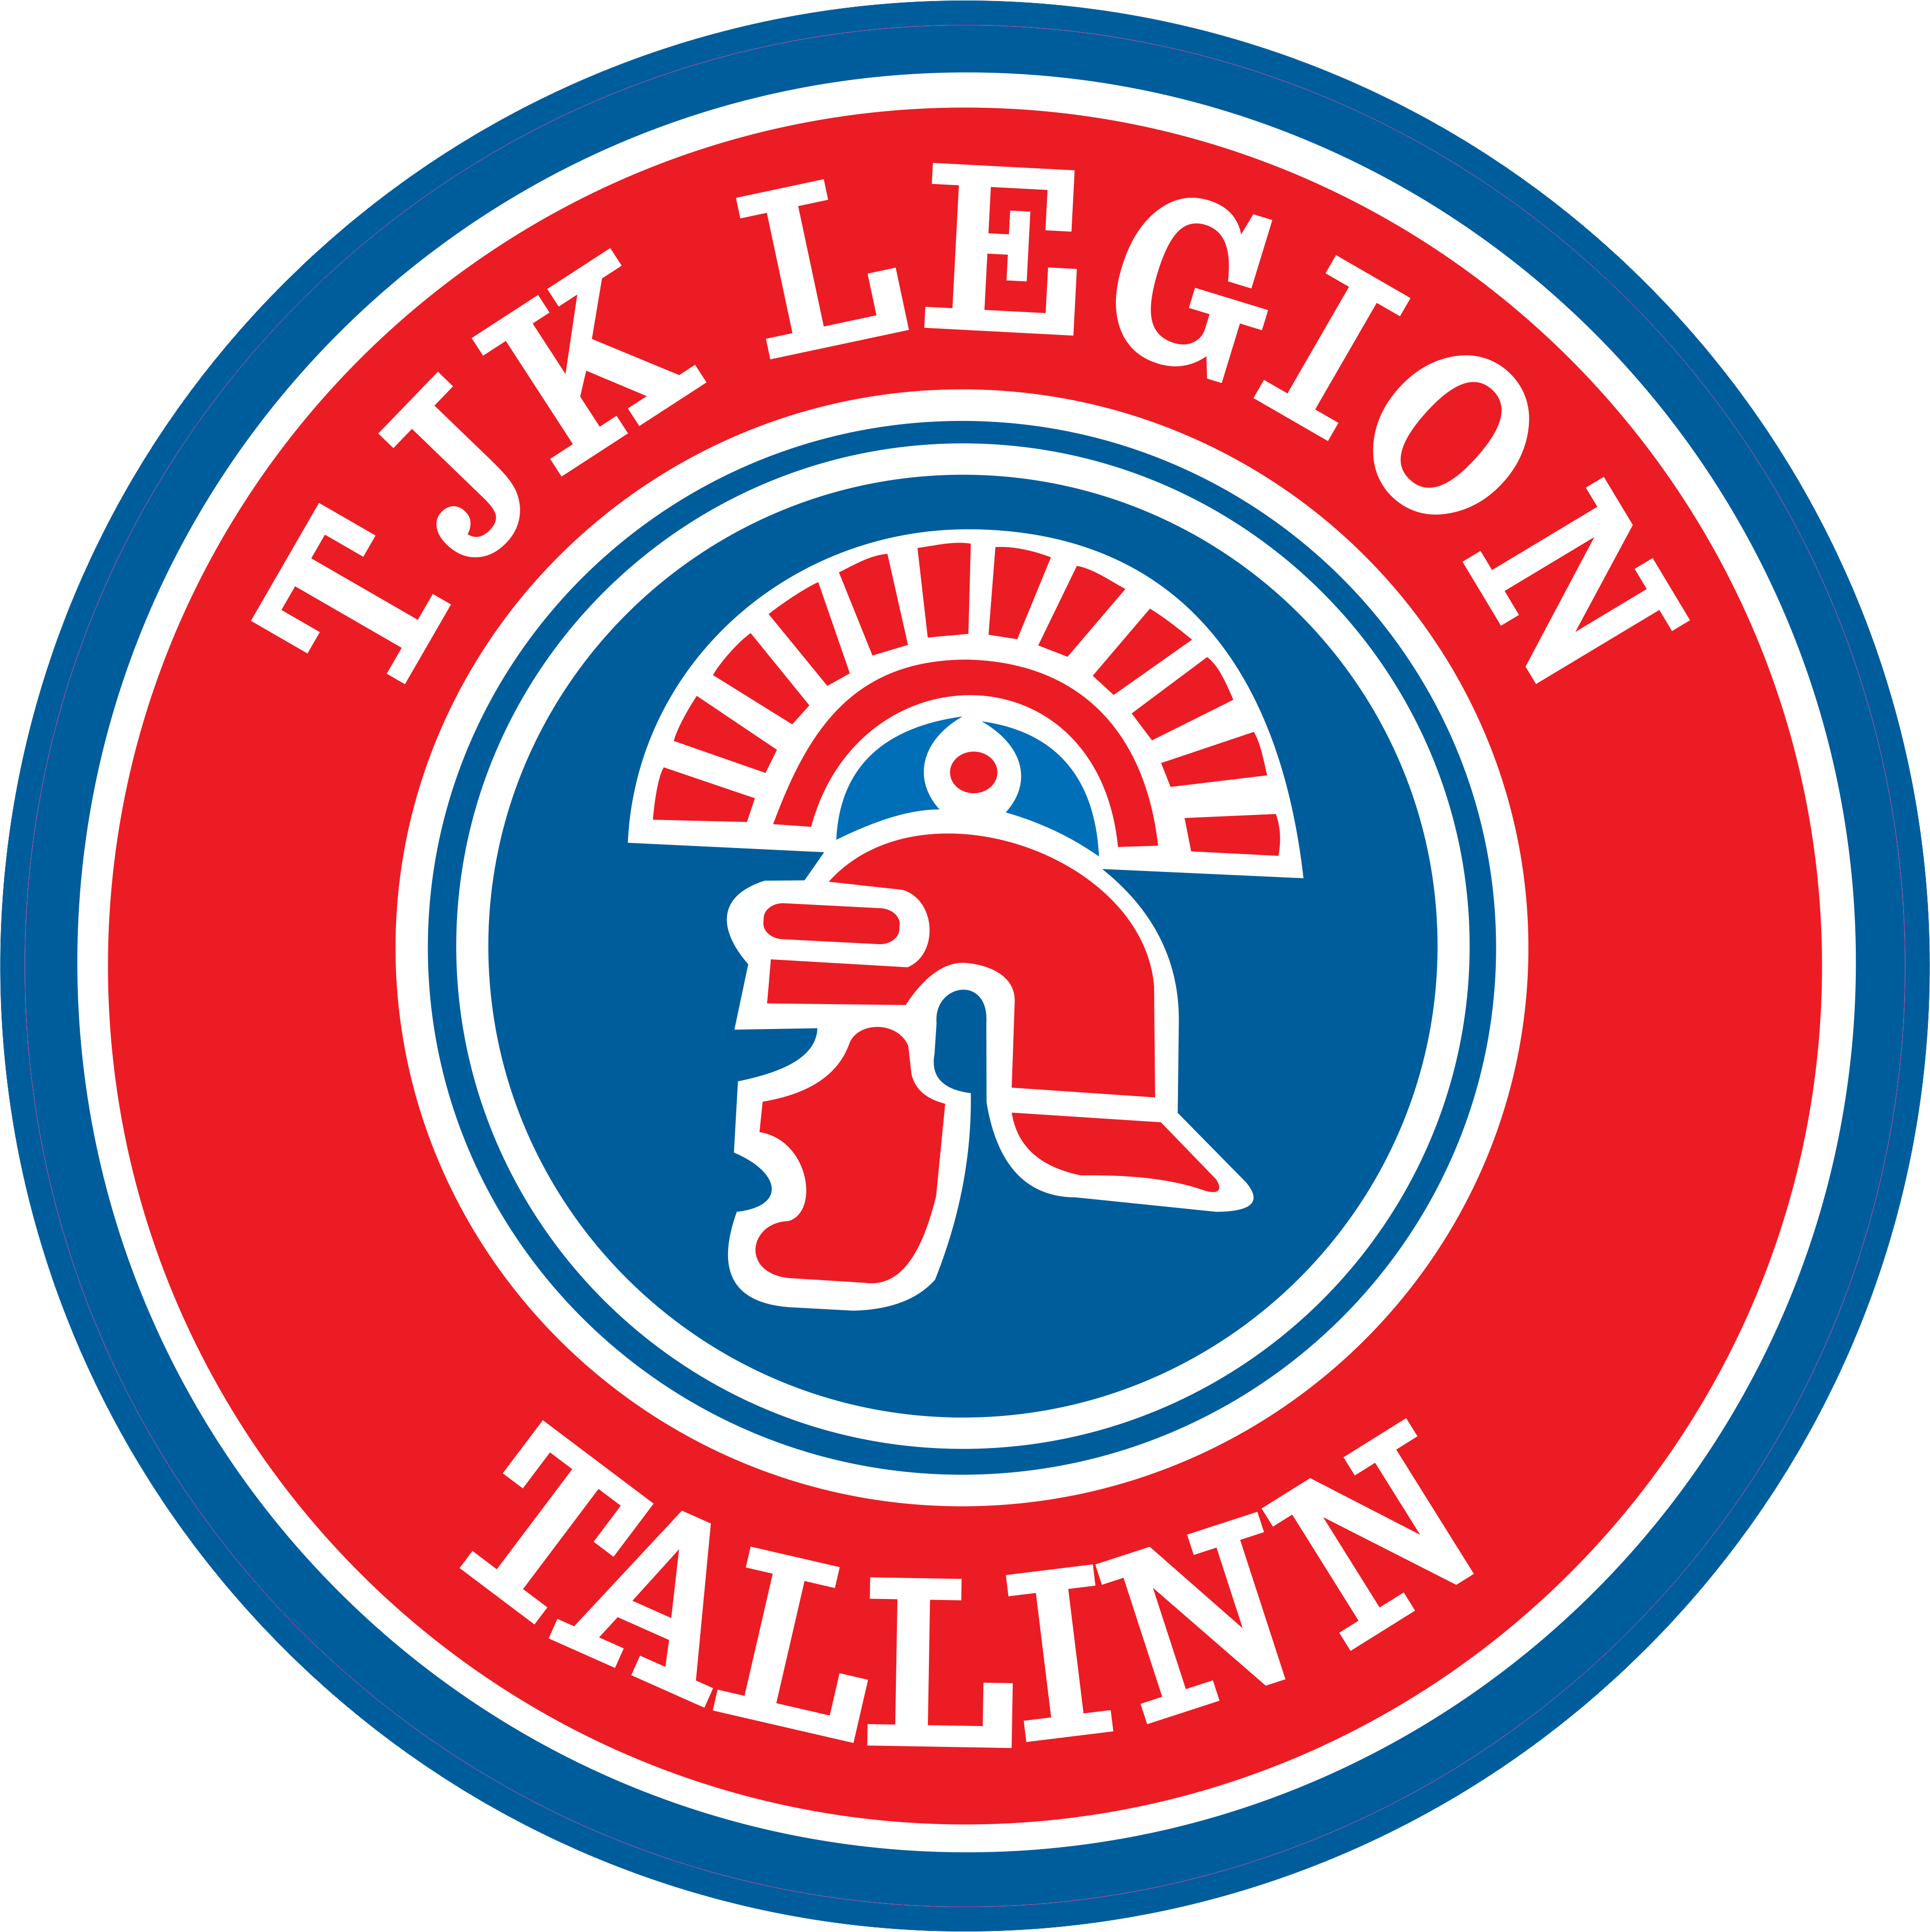 You are currently viewing Tallinna JK Legion